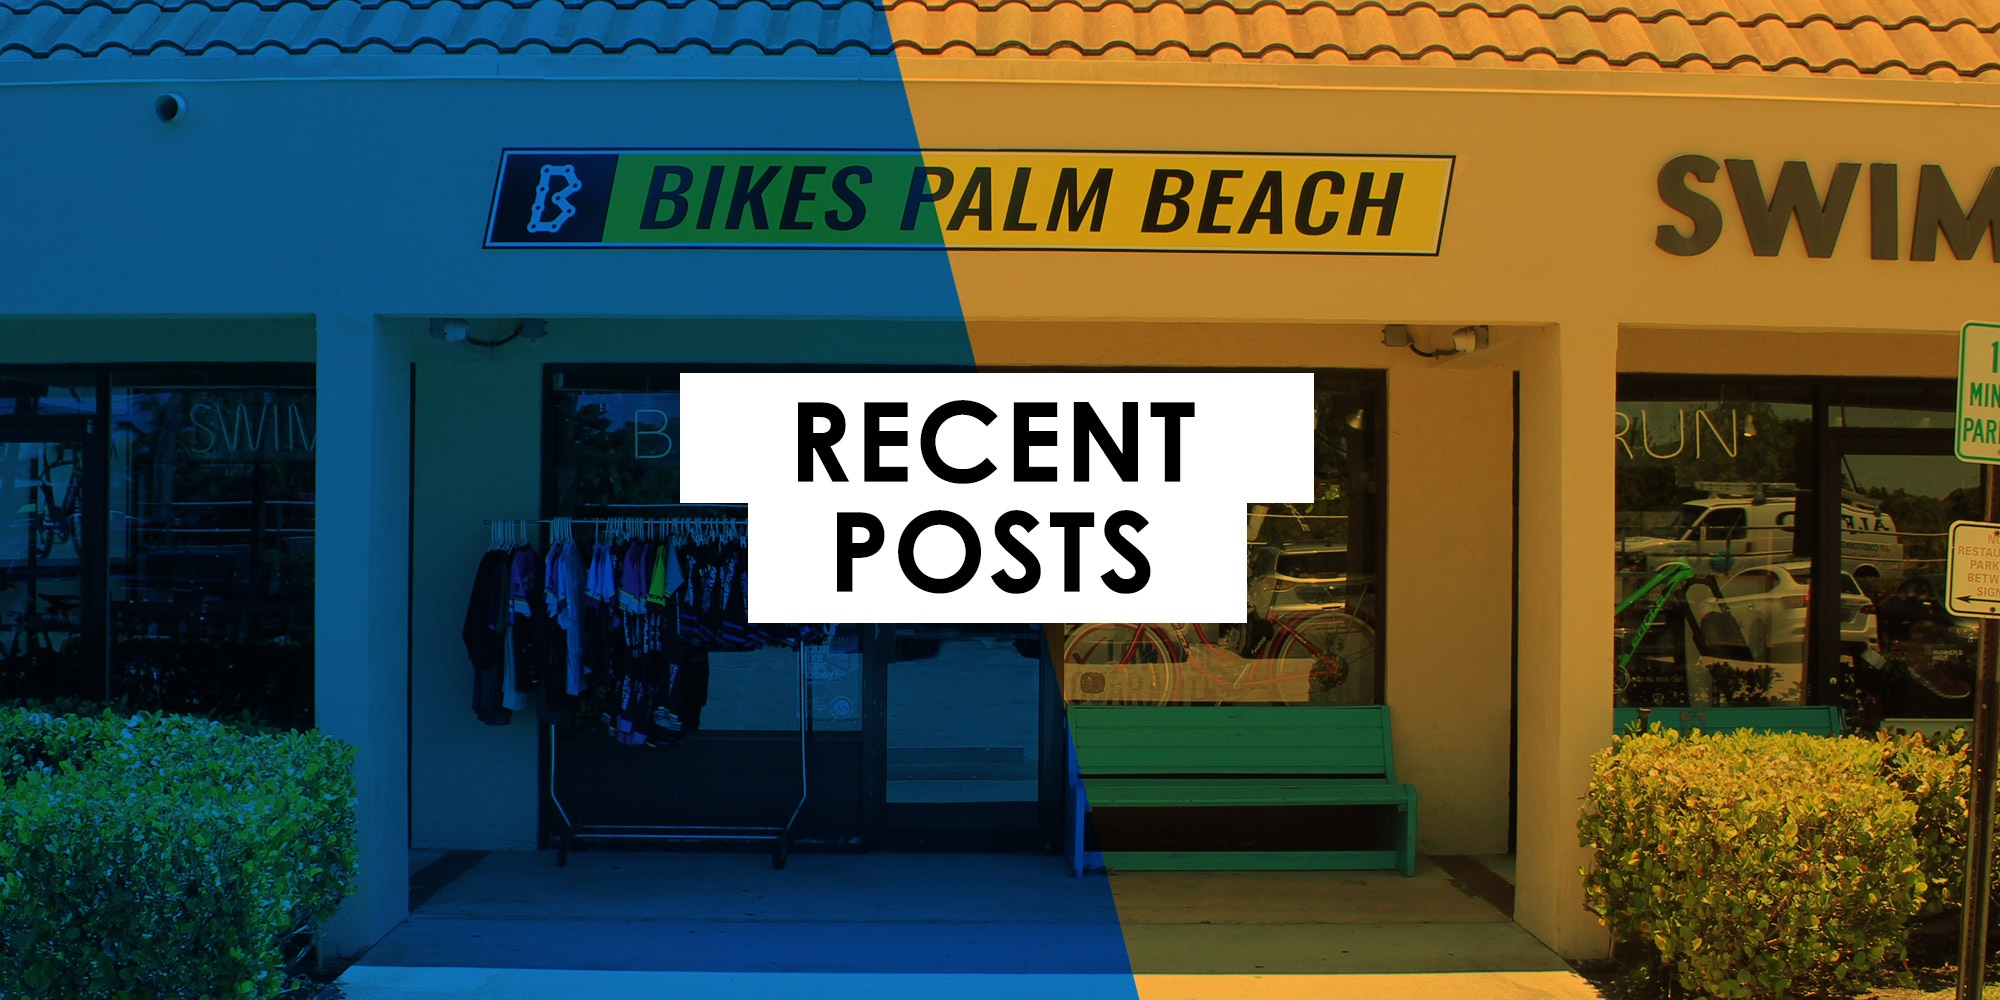 Recent Posts from Bikes Palm Beach